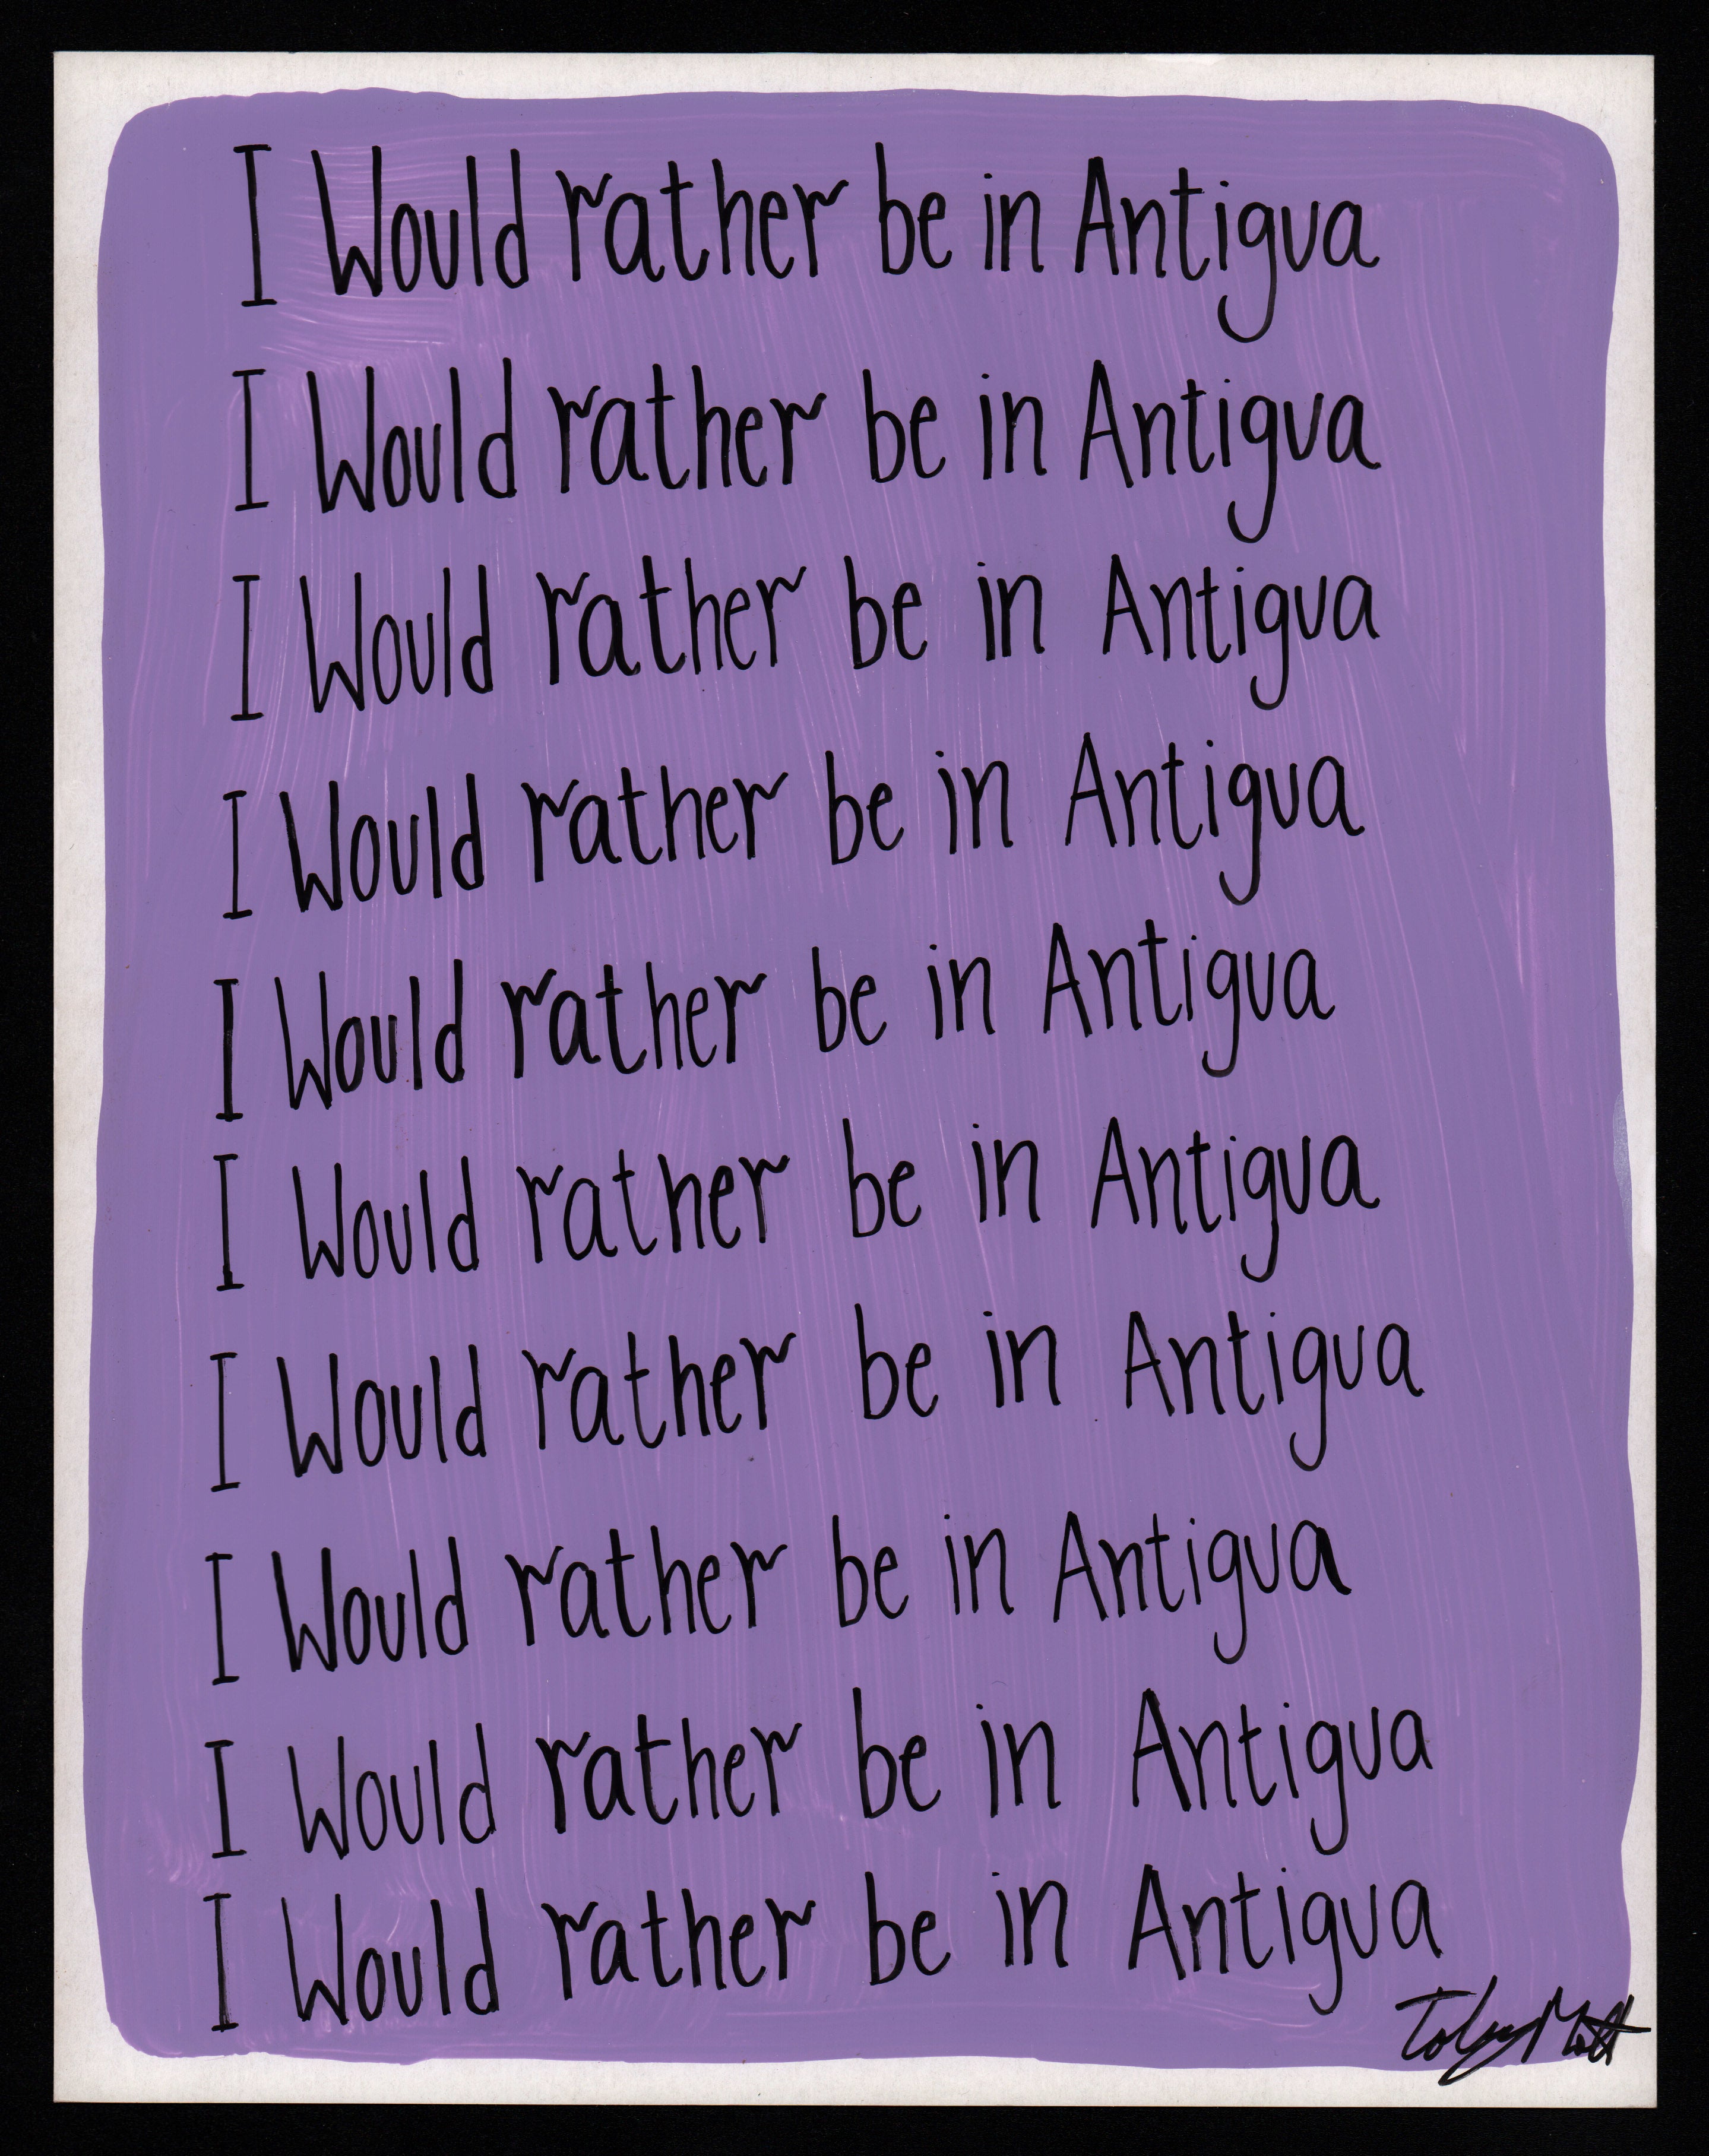 I'd rather be in Antigua